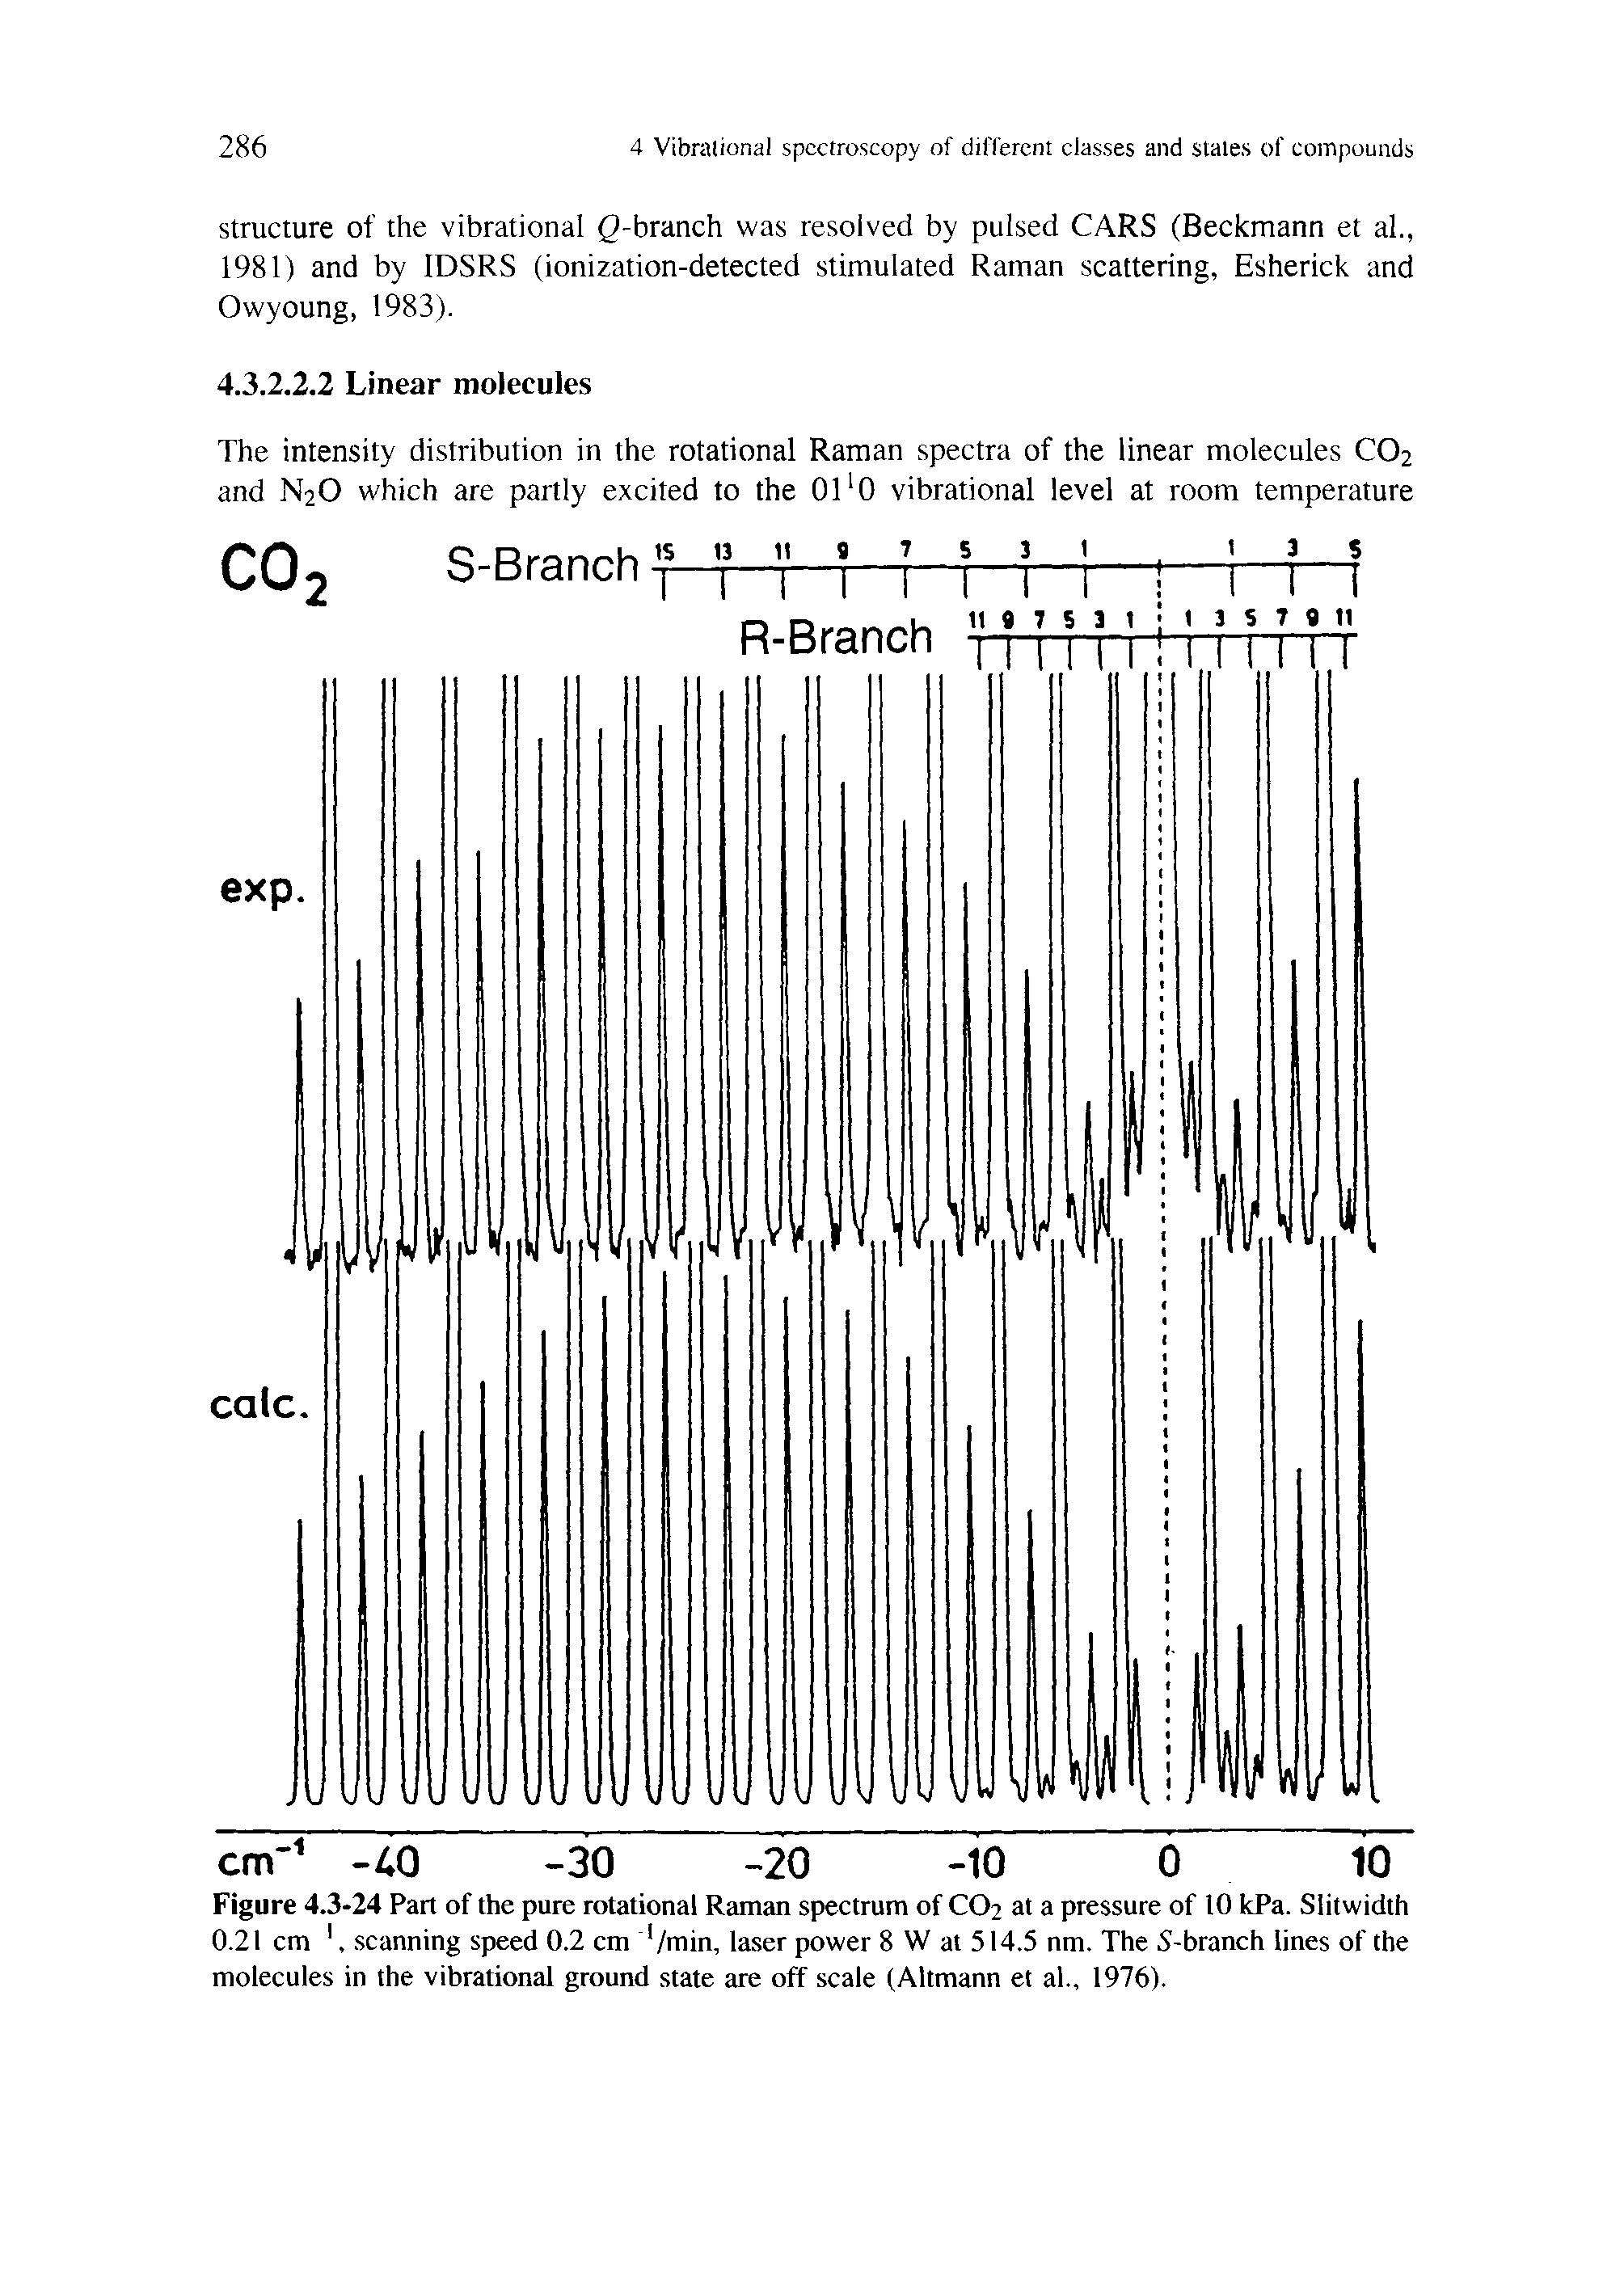 Figure 4.3-24 Part of the pure rotational Raman spectrum of CO2 at a pressure of 10 kPa. Slitwidth 0.21 cm, scanning speed 0.2 cm /min, laser power 8 W at 514.5 nm. The S-branch lines of the molecules in the vibrational ground state are off scale (Altmann et al., 1976).